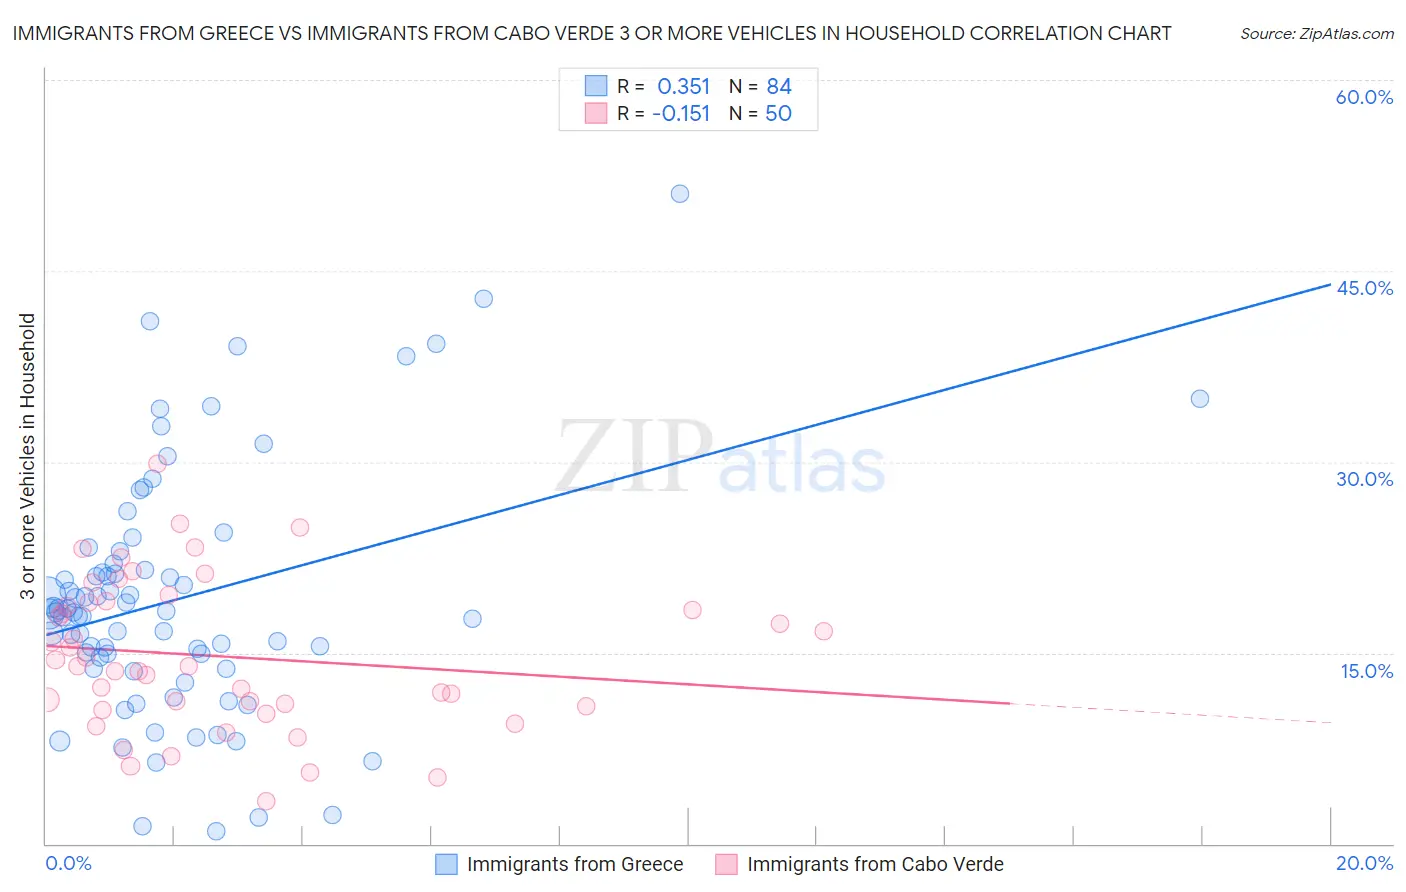 Immigrants from Greece vs Immigrants from Cabo Verde 3 or more Vehicles in Household